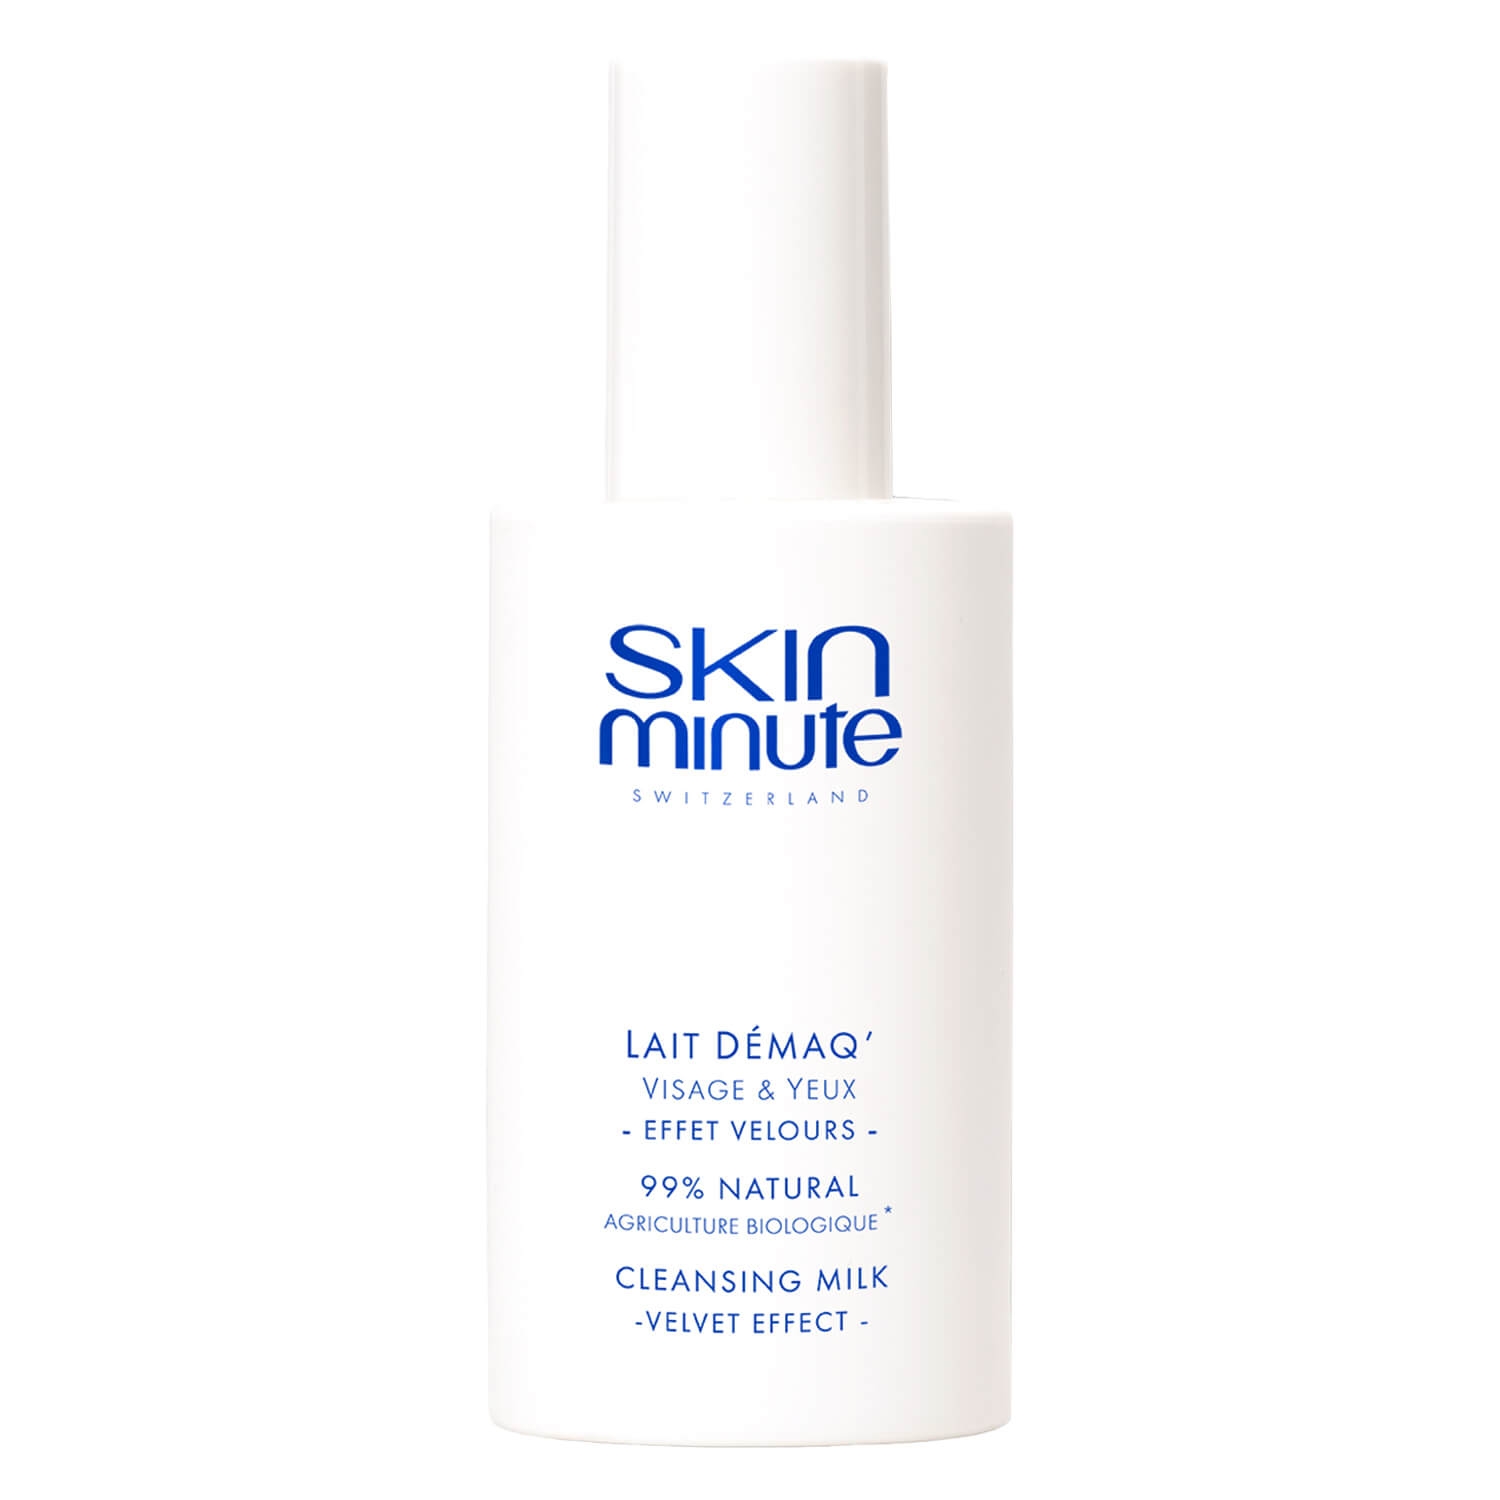 Product image from skinminute - Abschmink-Milch